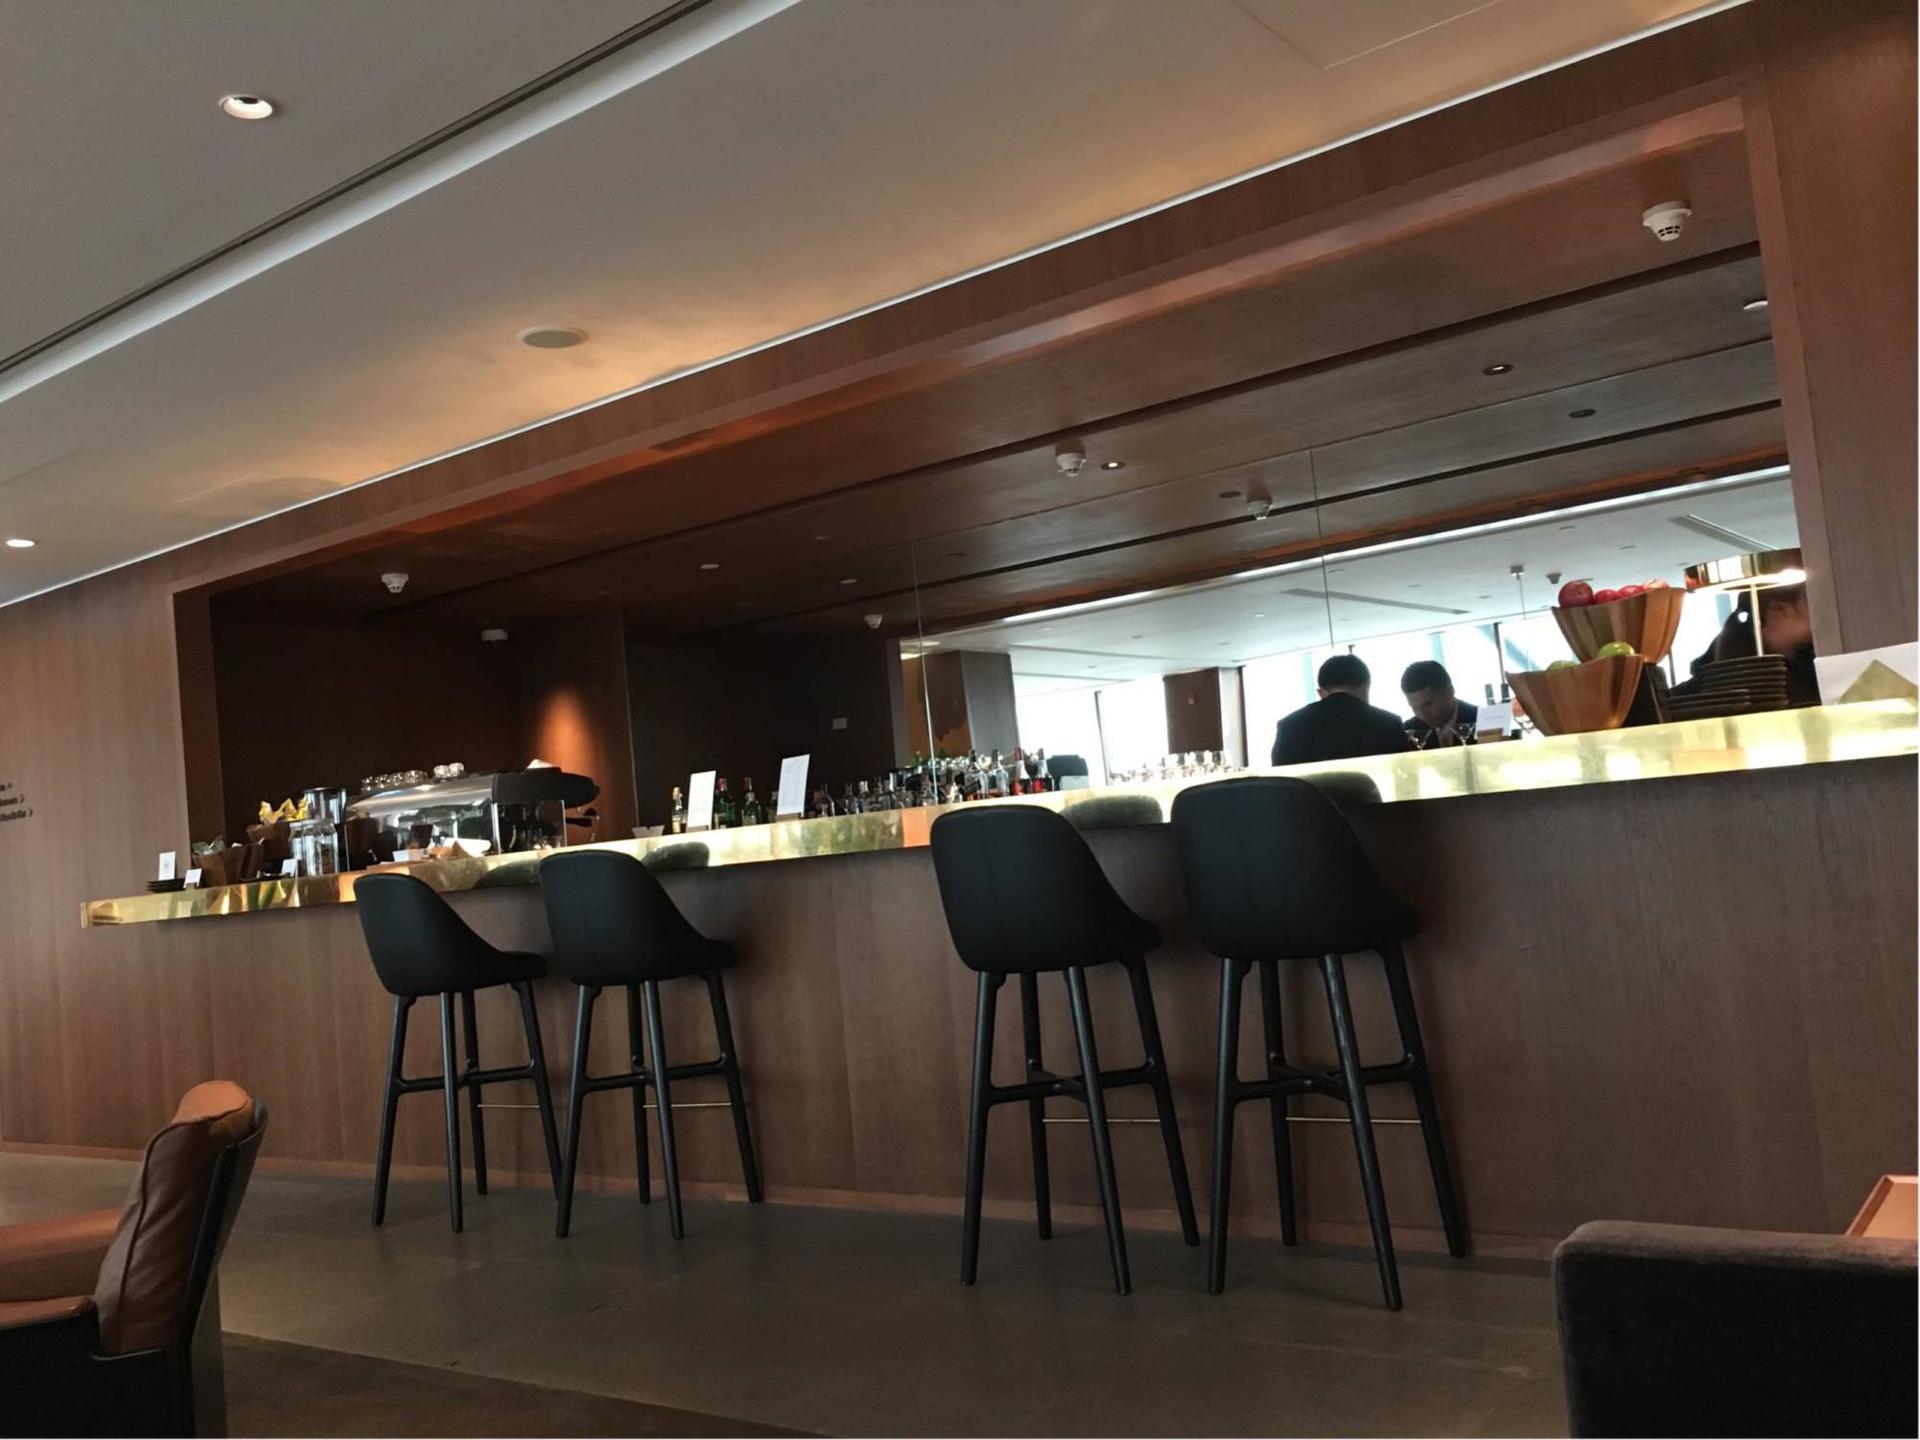 Cathay Pacific First and Business Class Lounge image 17 of 69